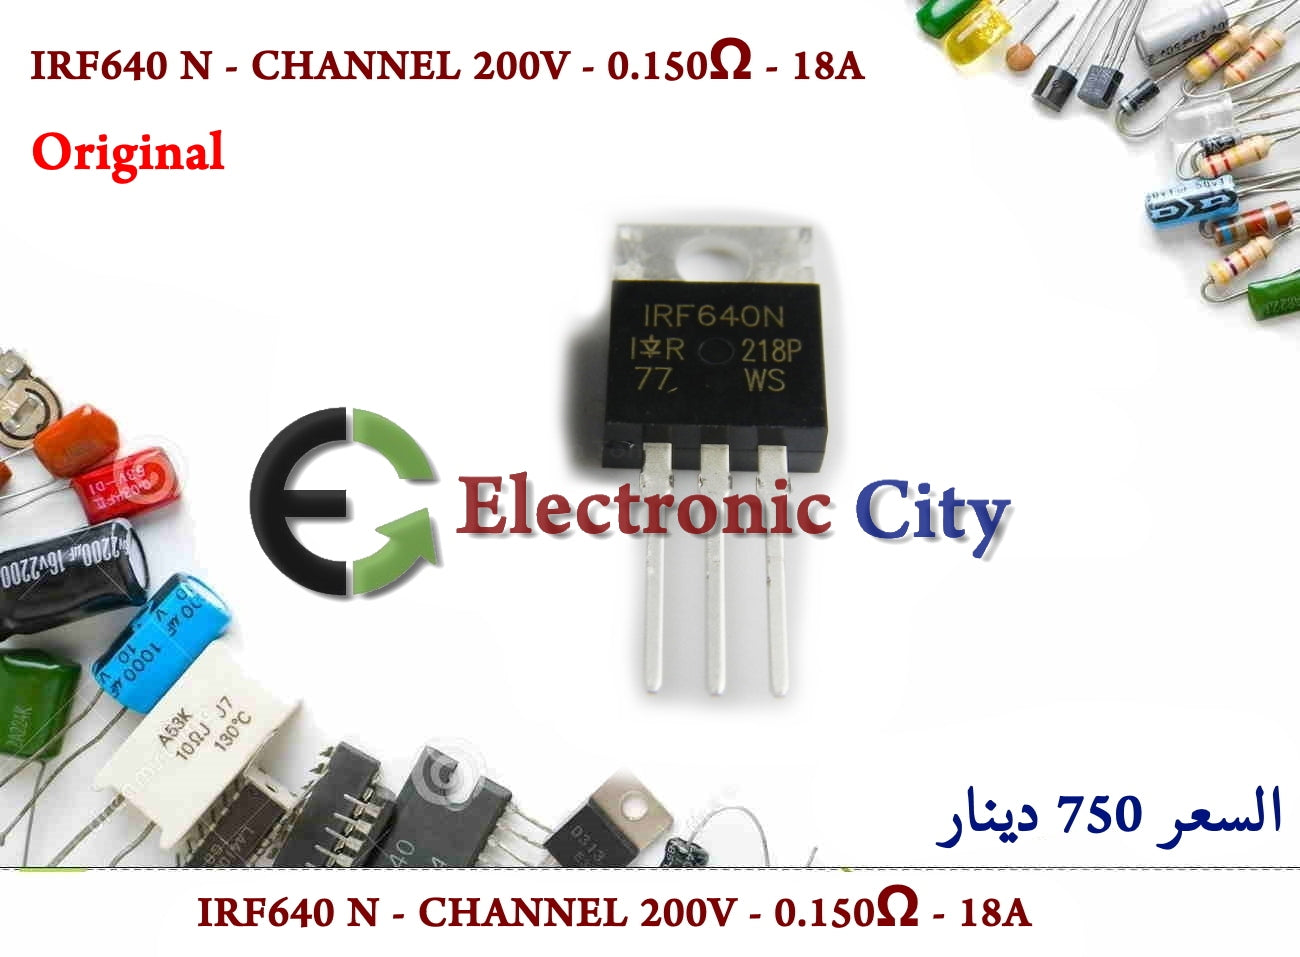 IRF640 N - CHANNEL 200V - 0.150Ω - 18A